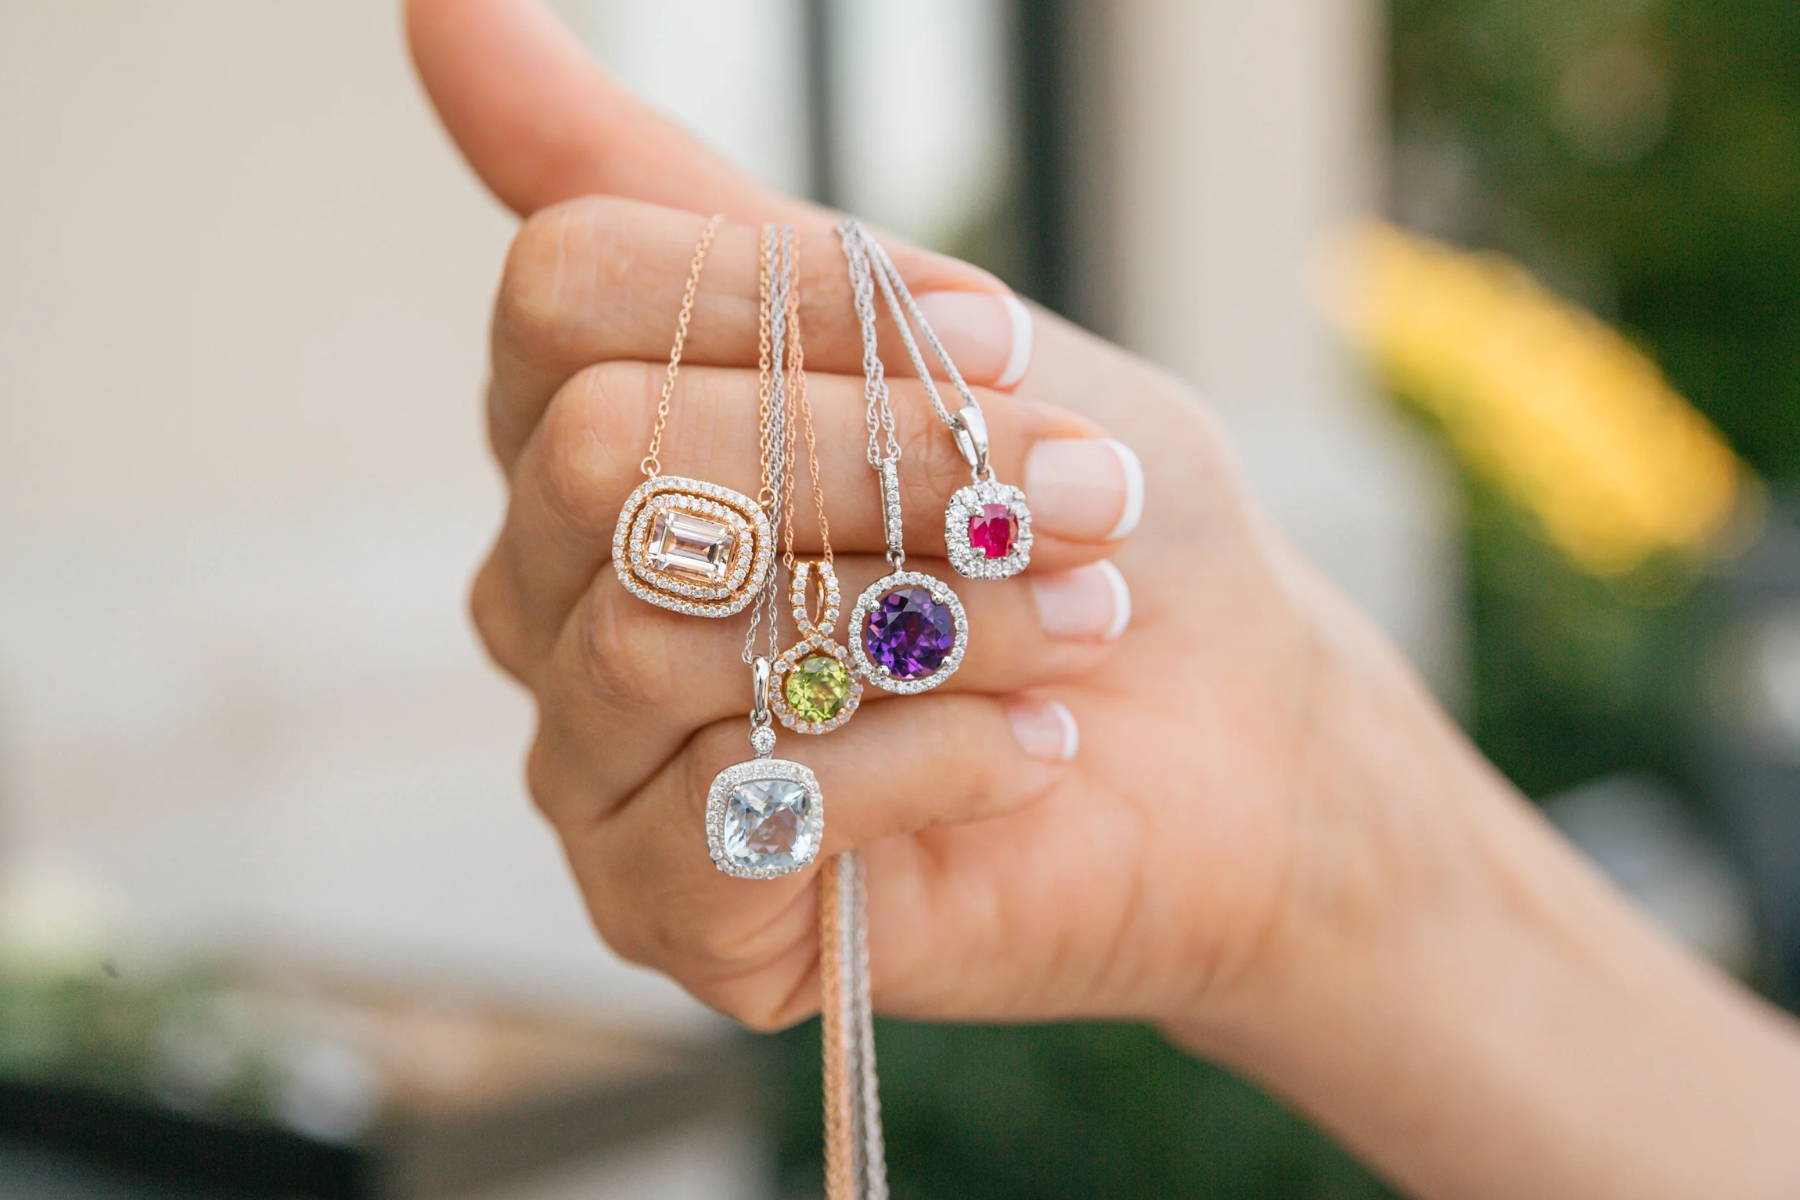 Five birthstone necklaces on a woman's hand